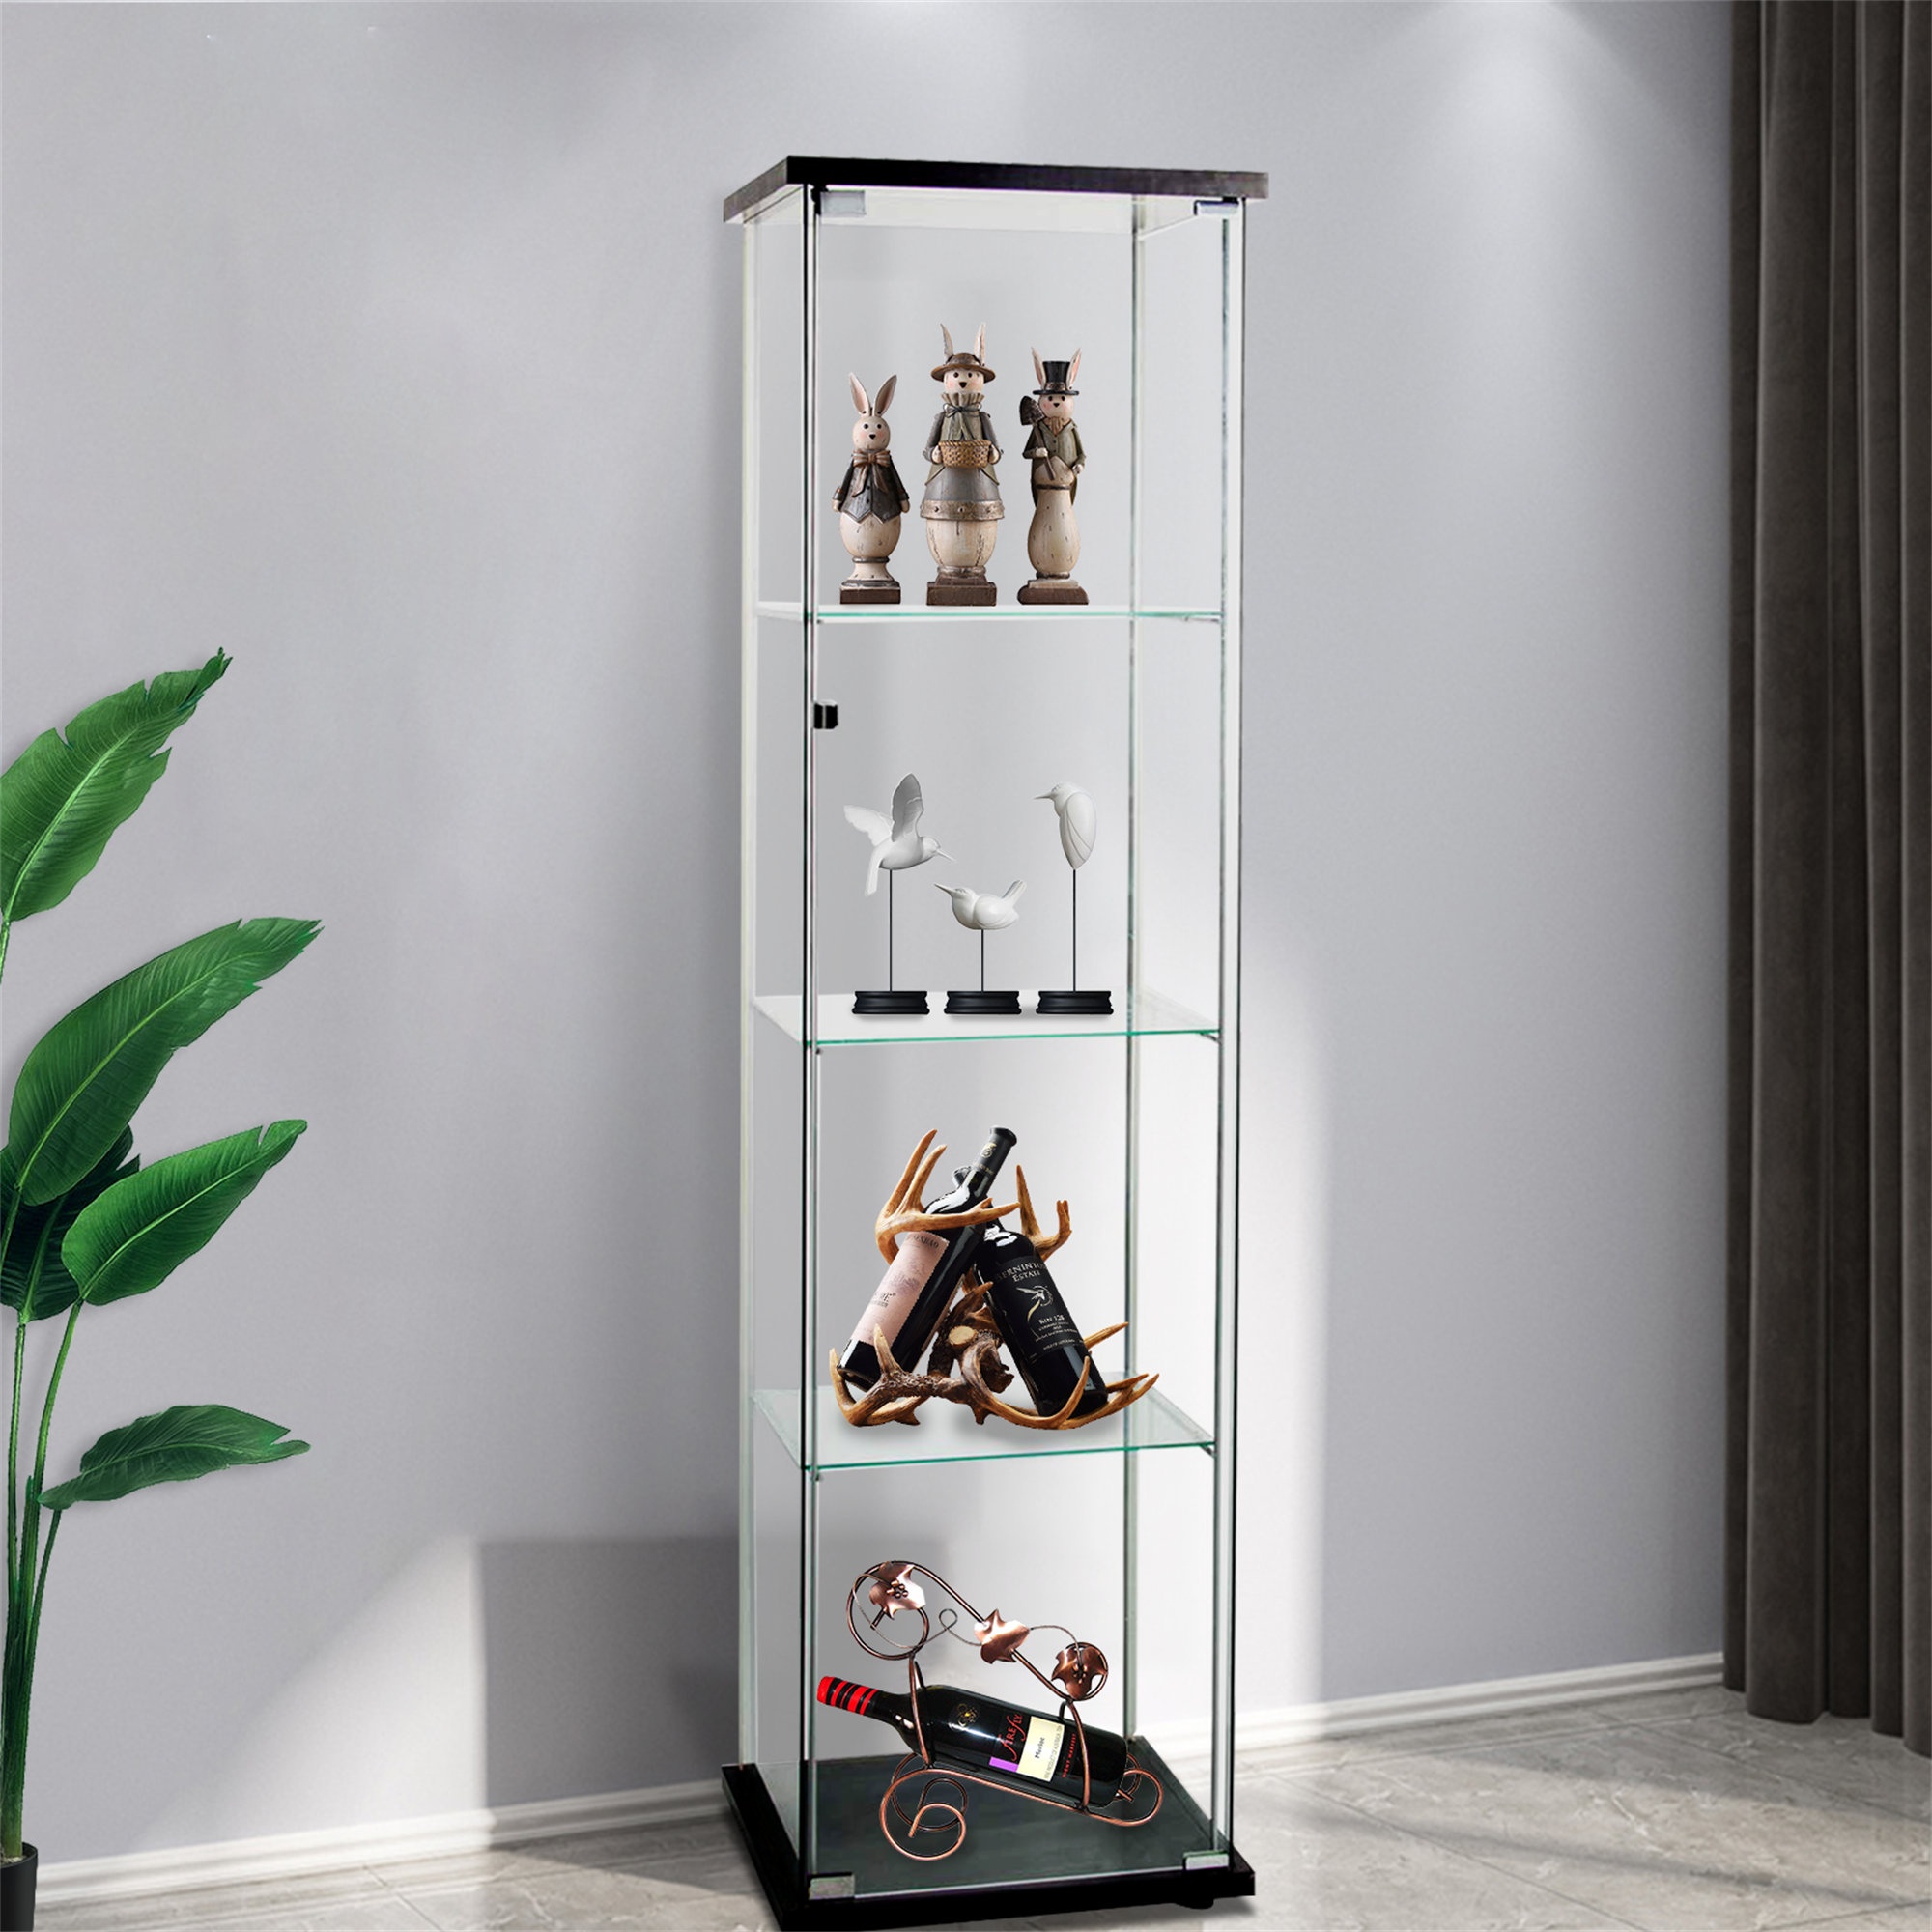 Display Cases For Collectibles - VisualHunt